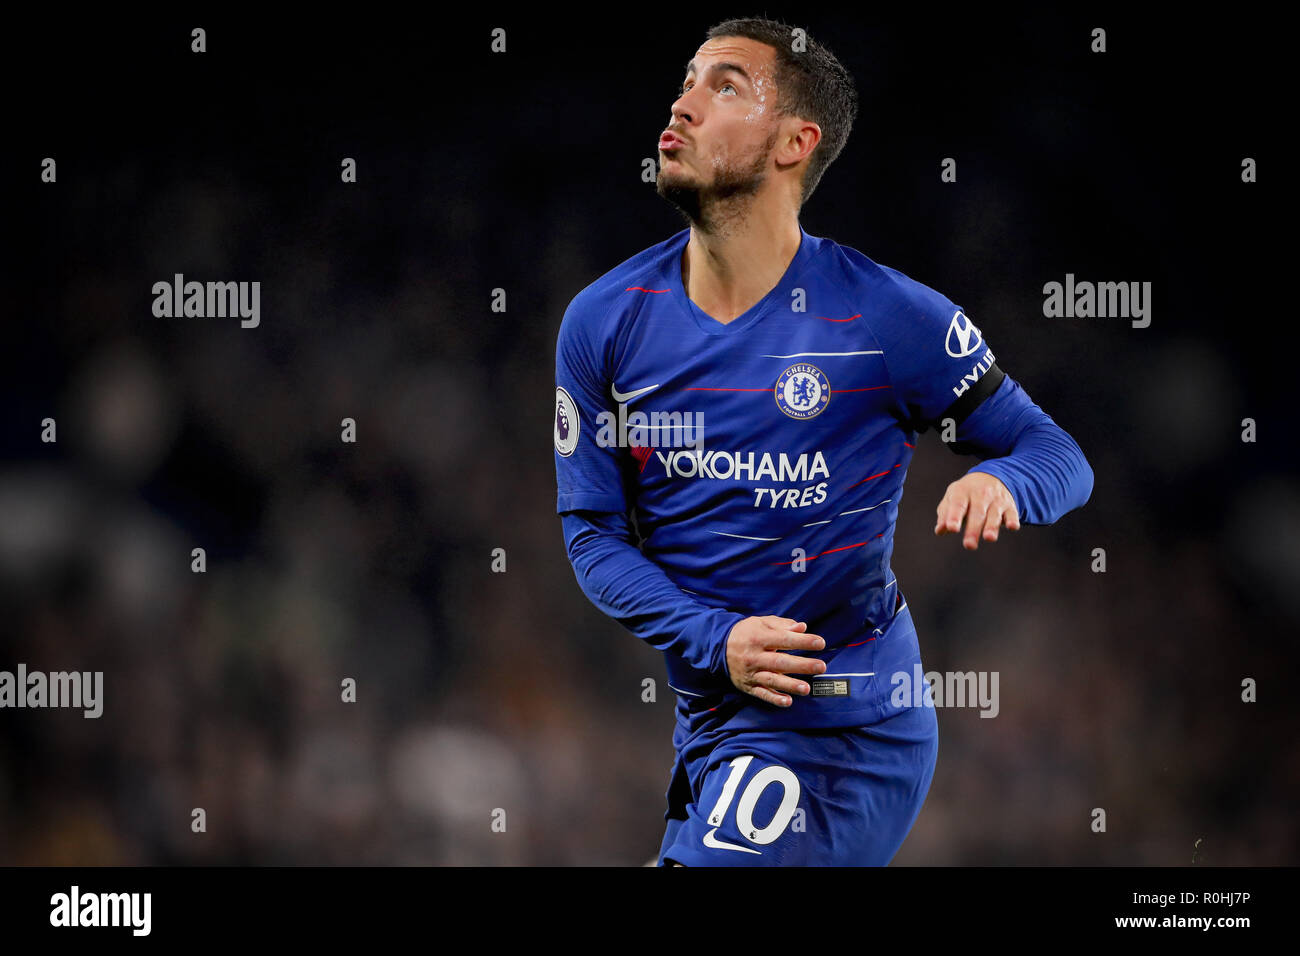 Eden Hazard of Chelsea - Chelsea v Crystal Palace, Premier League, Stamford Bridge, London - 4th November 2018  STRICTLY EDITORIAL USE ONLY - DataCo rules apply - The use of this image in a commercial context is strictly prohibited unless express permission has been given by the club(s) concerned. Examples of commercial usage include, but are not limited to, use in betting and gaming, marketing and advertising products. No use with unauthorised audio, video, data, fixture lists, club and or league logos or services including those listed as 'live' Stock Photo